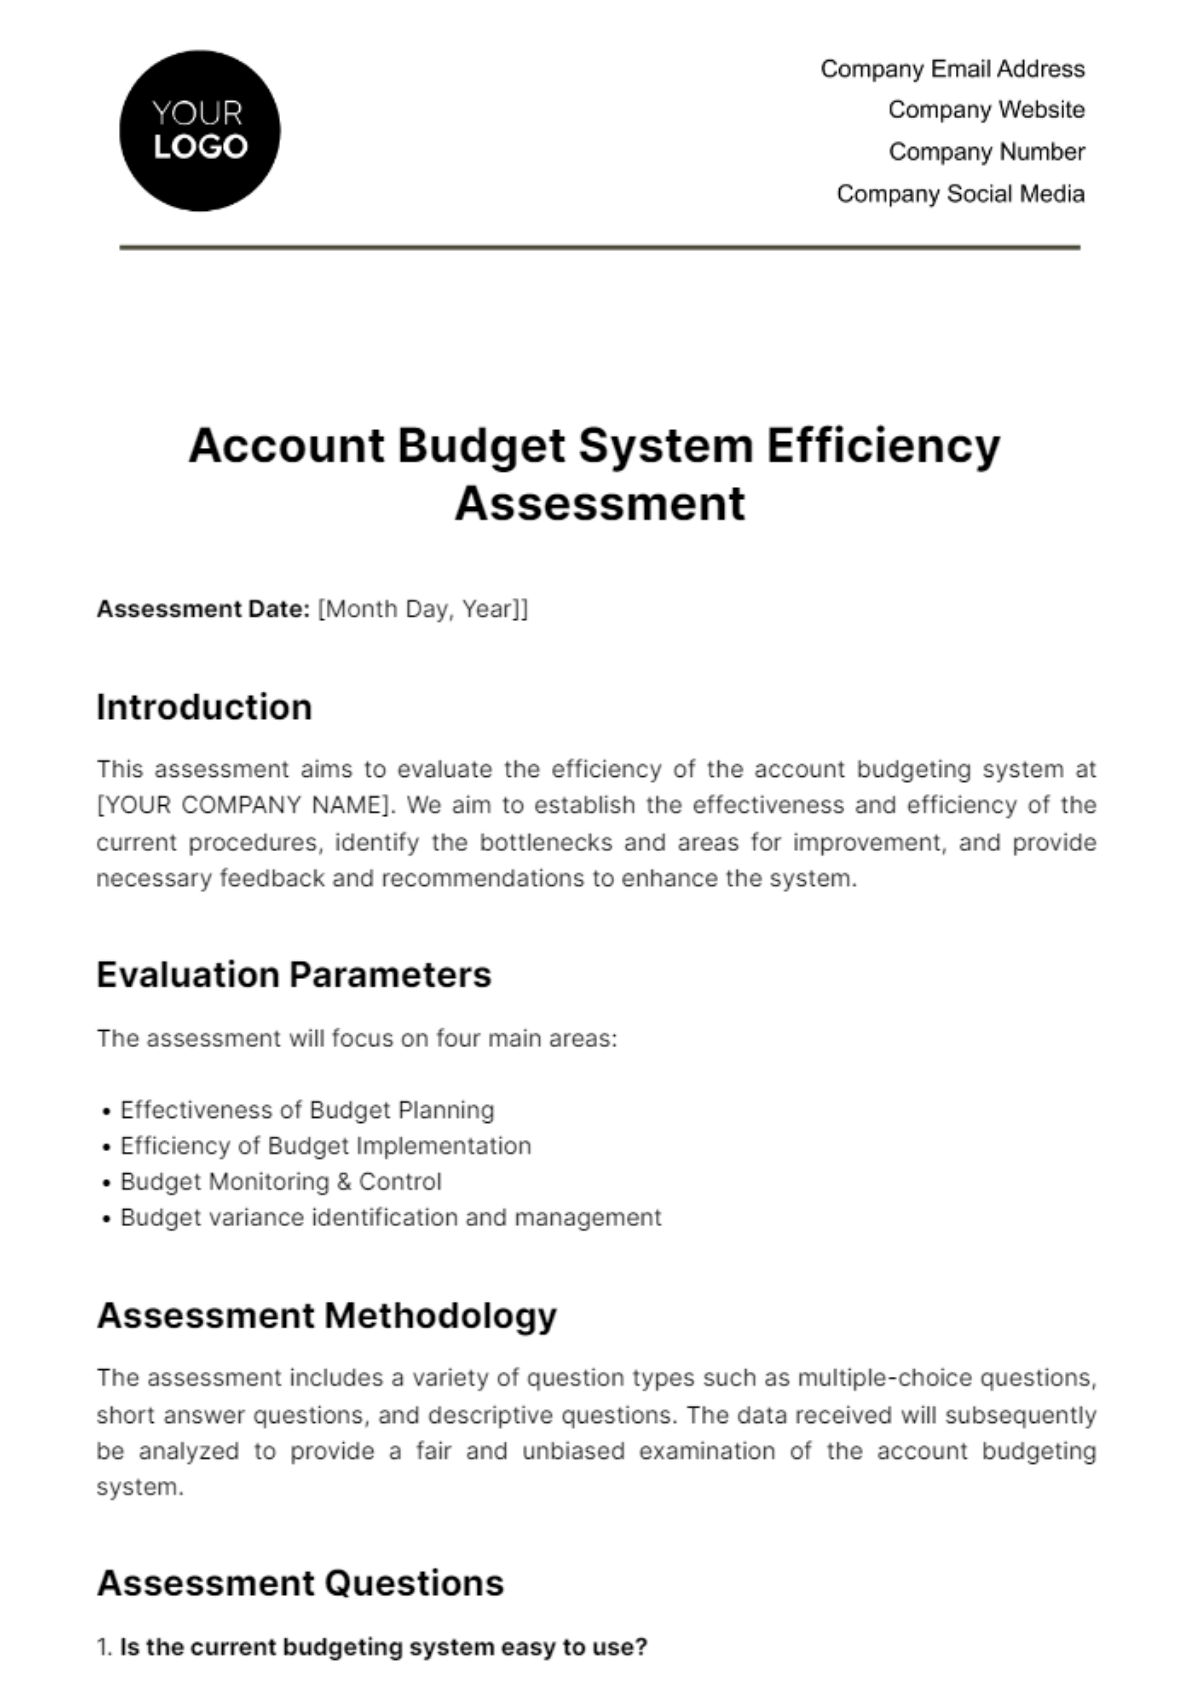 Account Budget System Efficiency Assessment Template